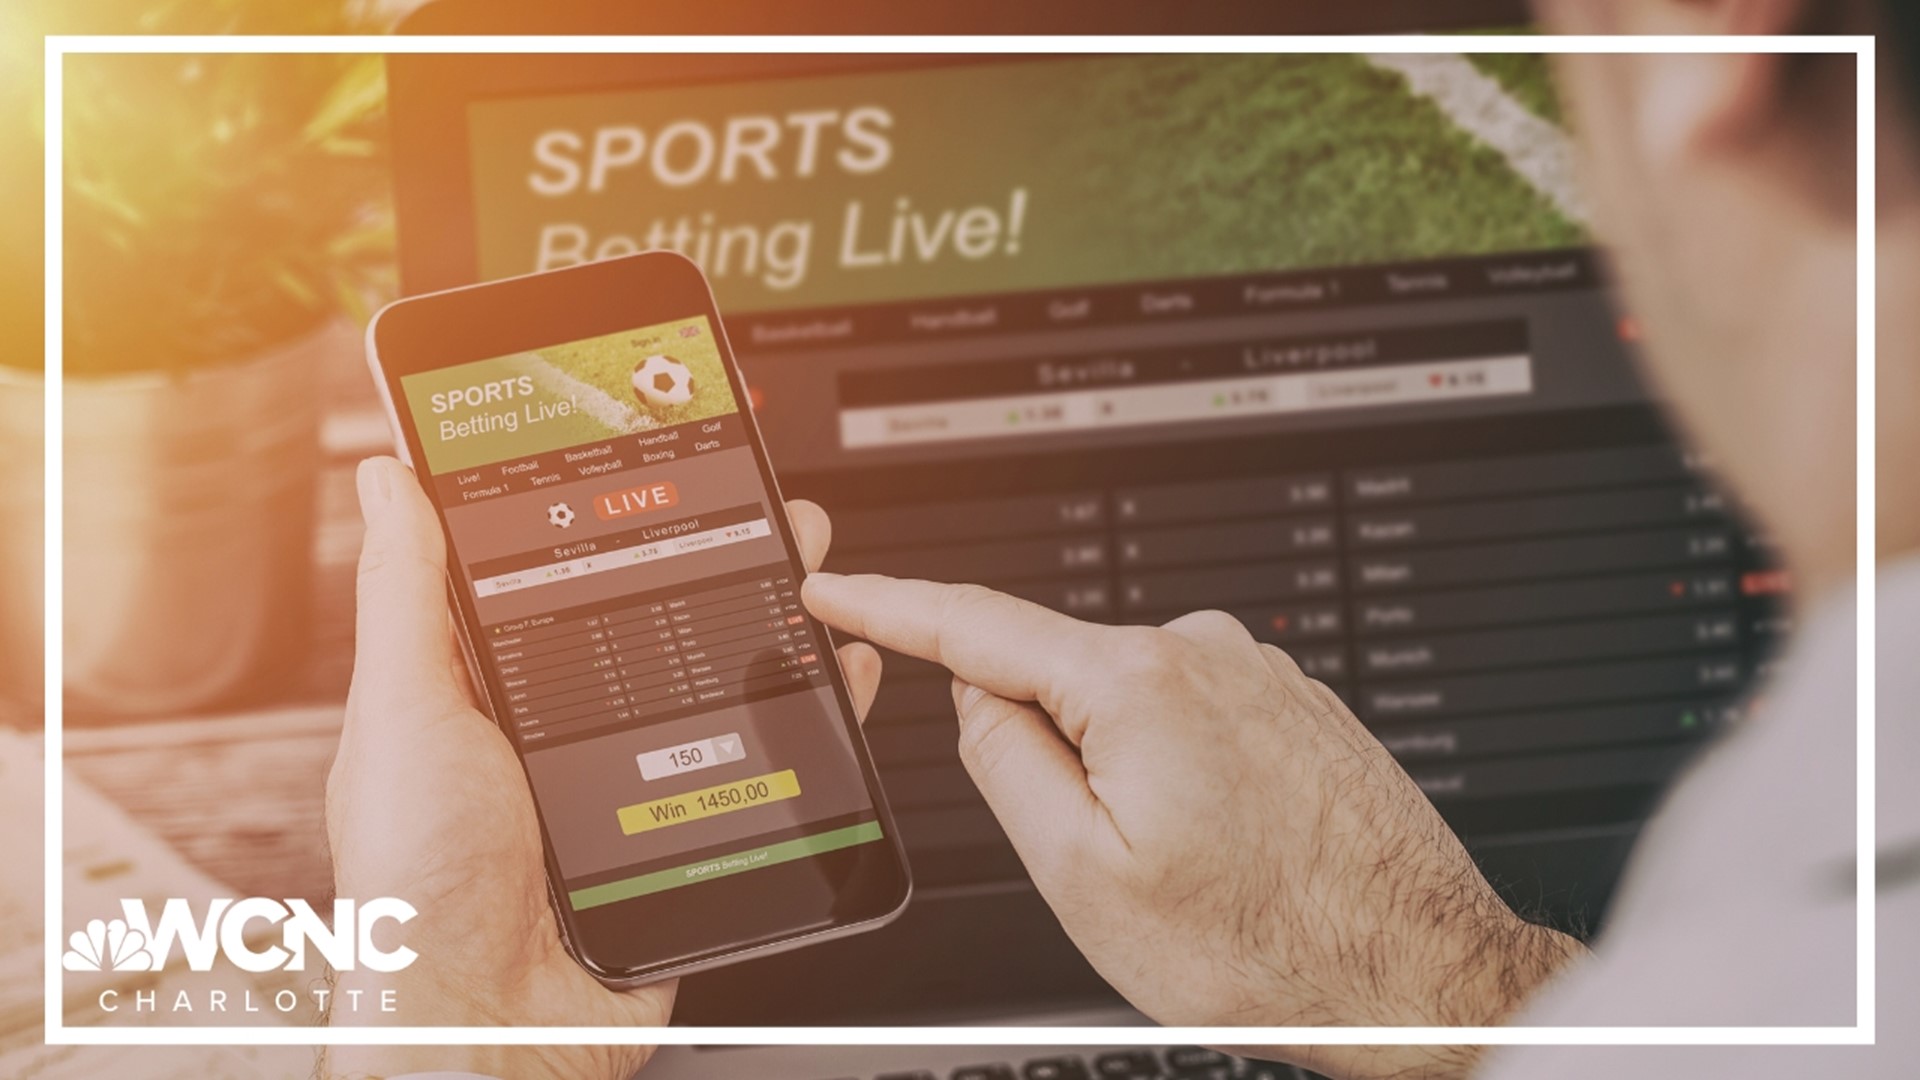 As North Carolina launches legal sports betting, here are the words and terms you will need to understand in order to bet.